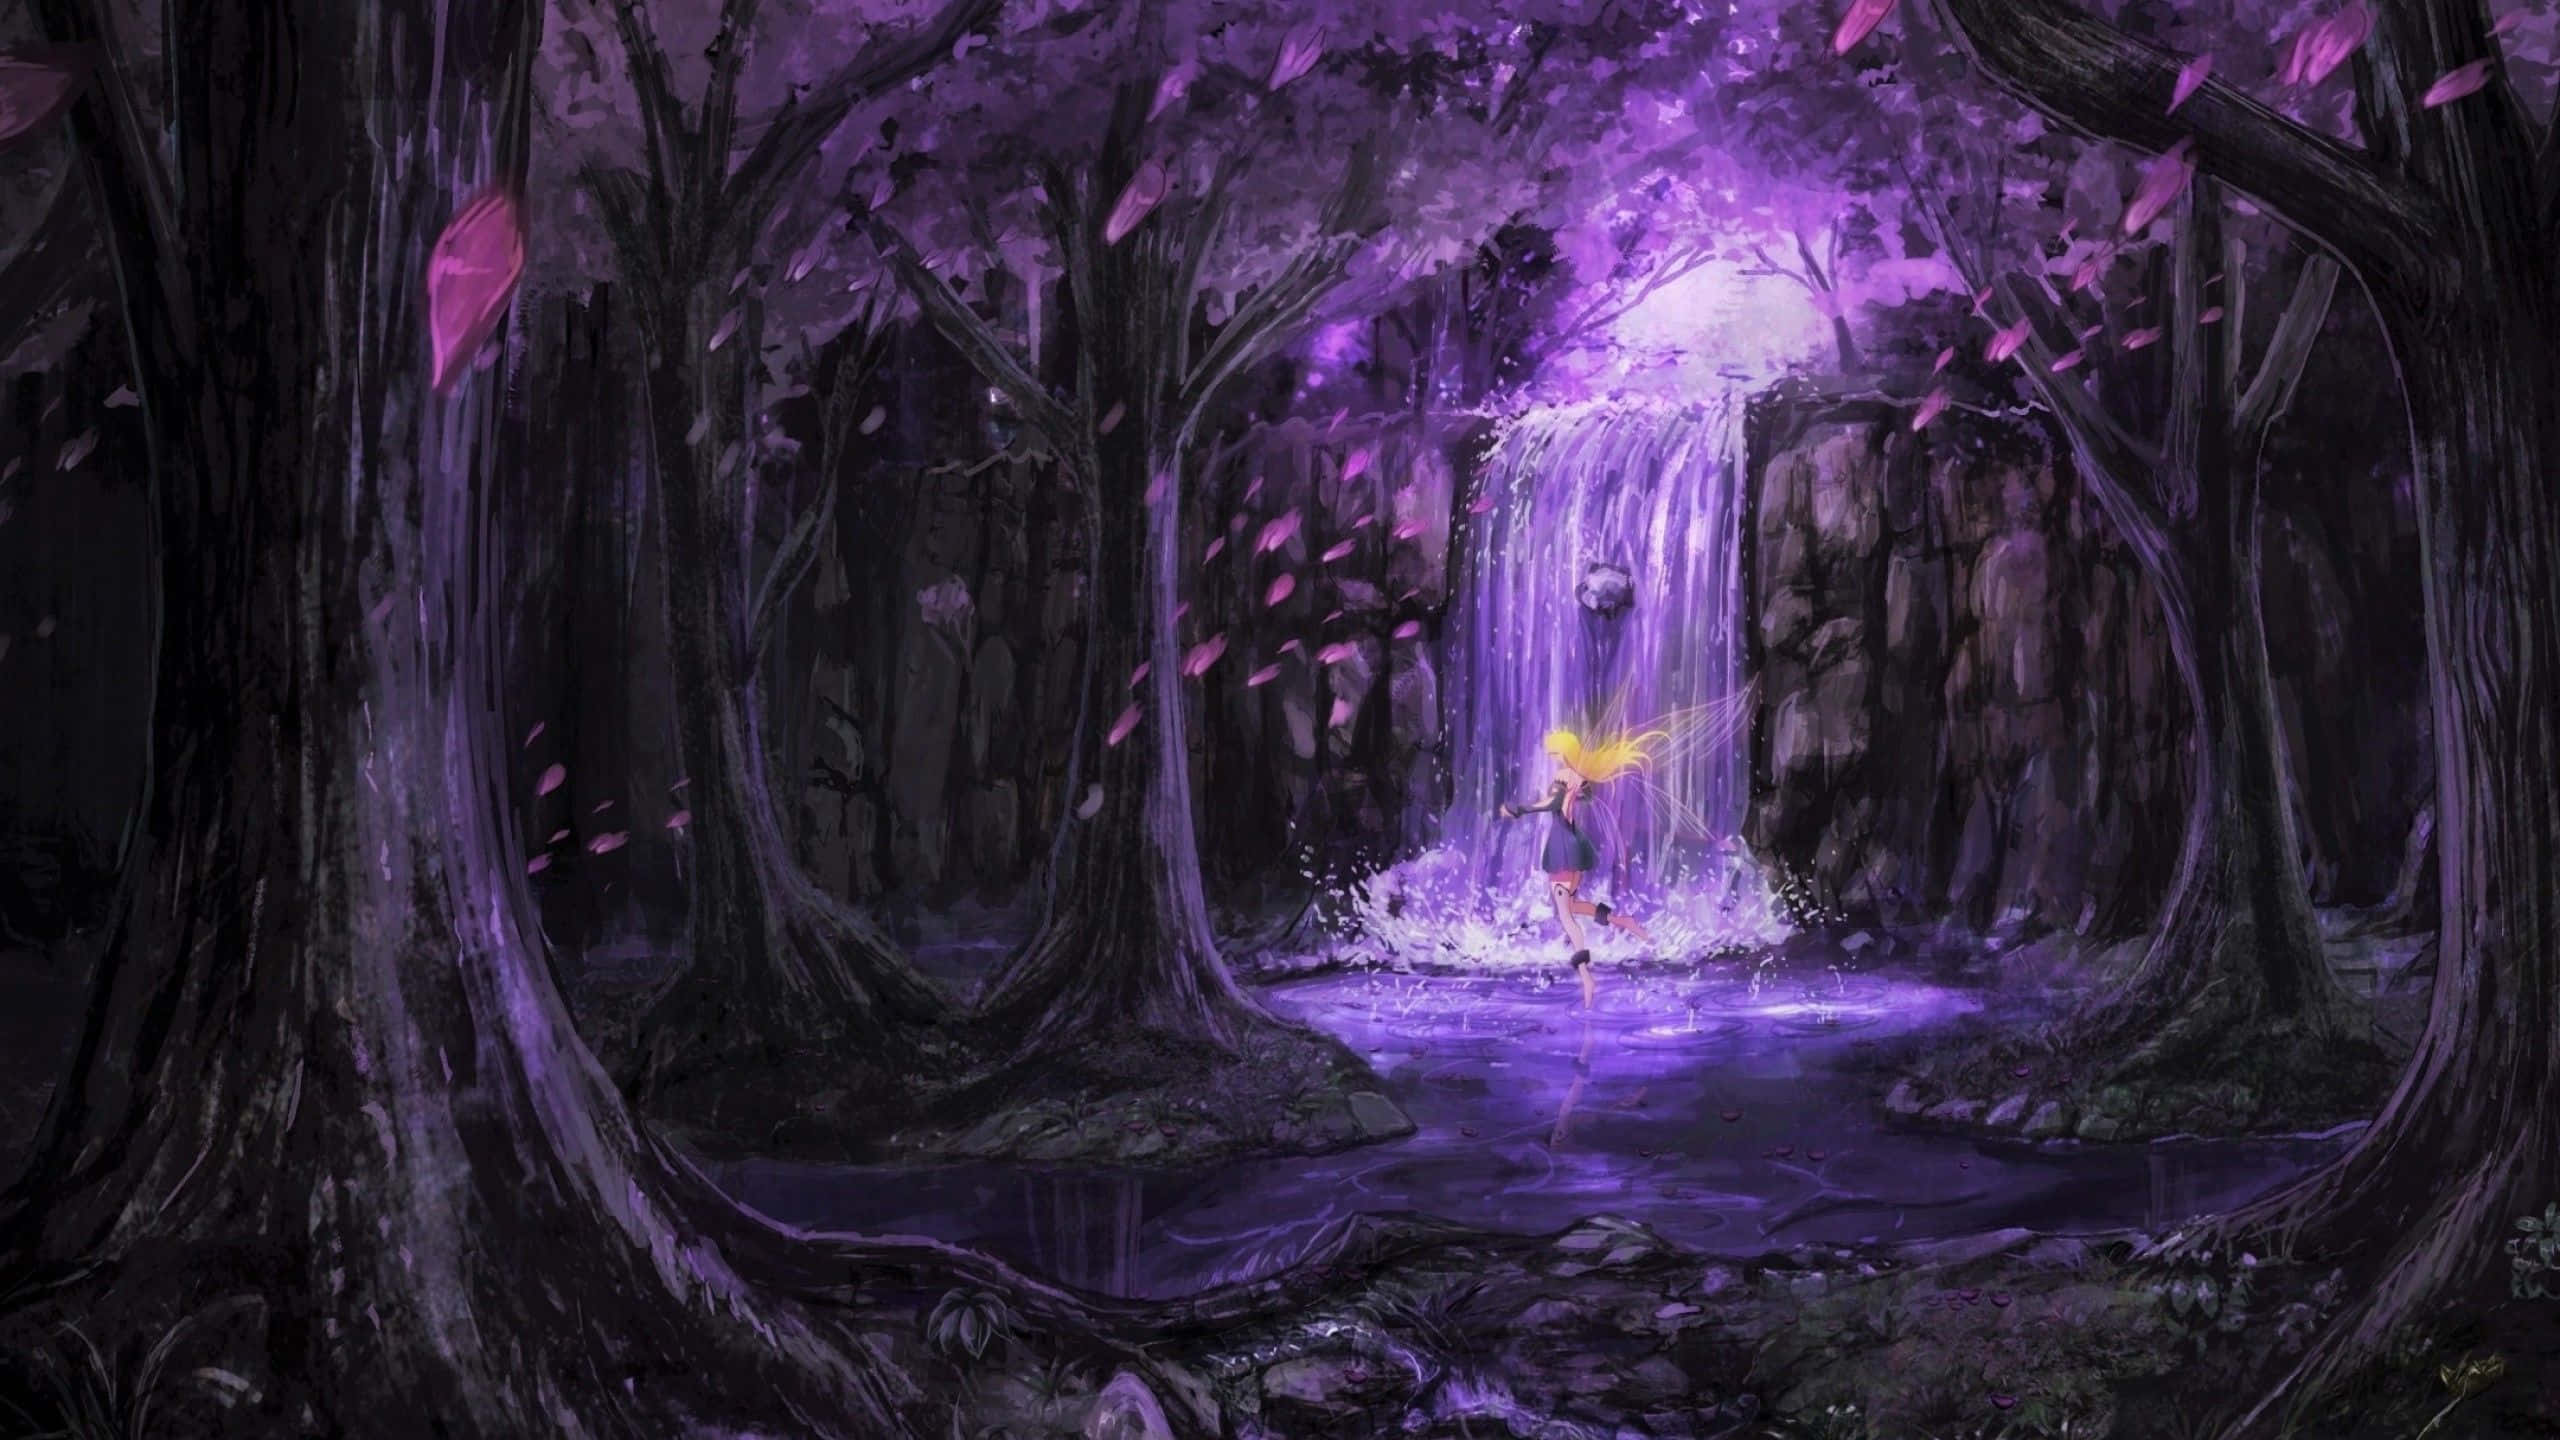 Explore the lush anime world of Anime Forest!